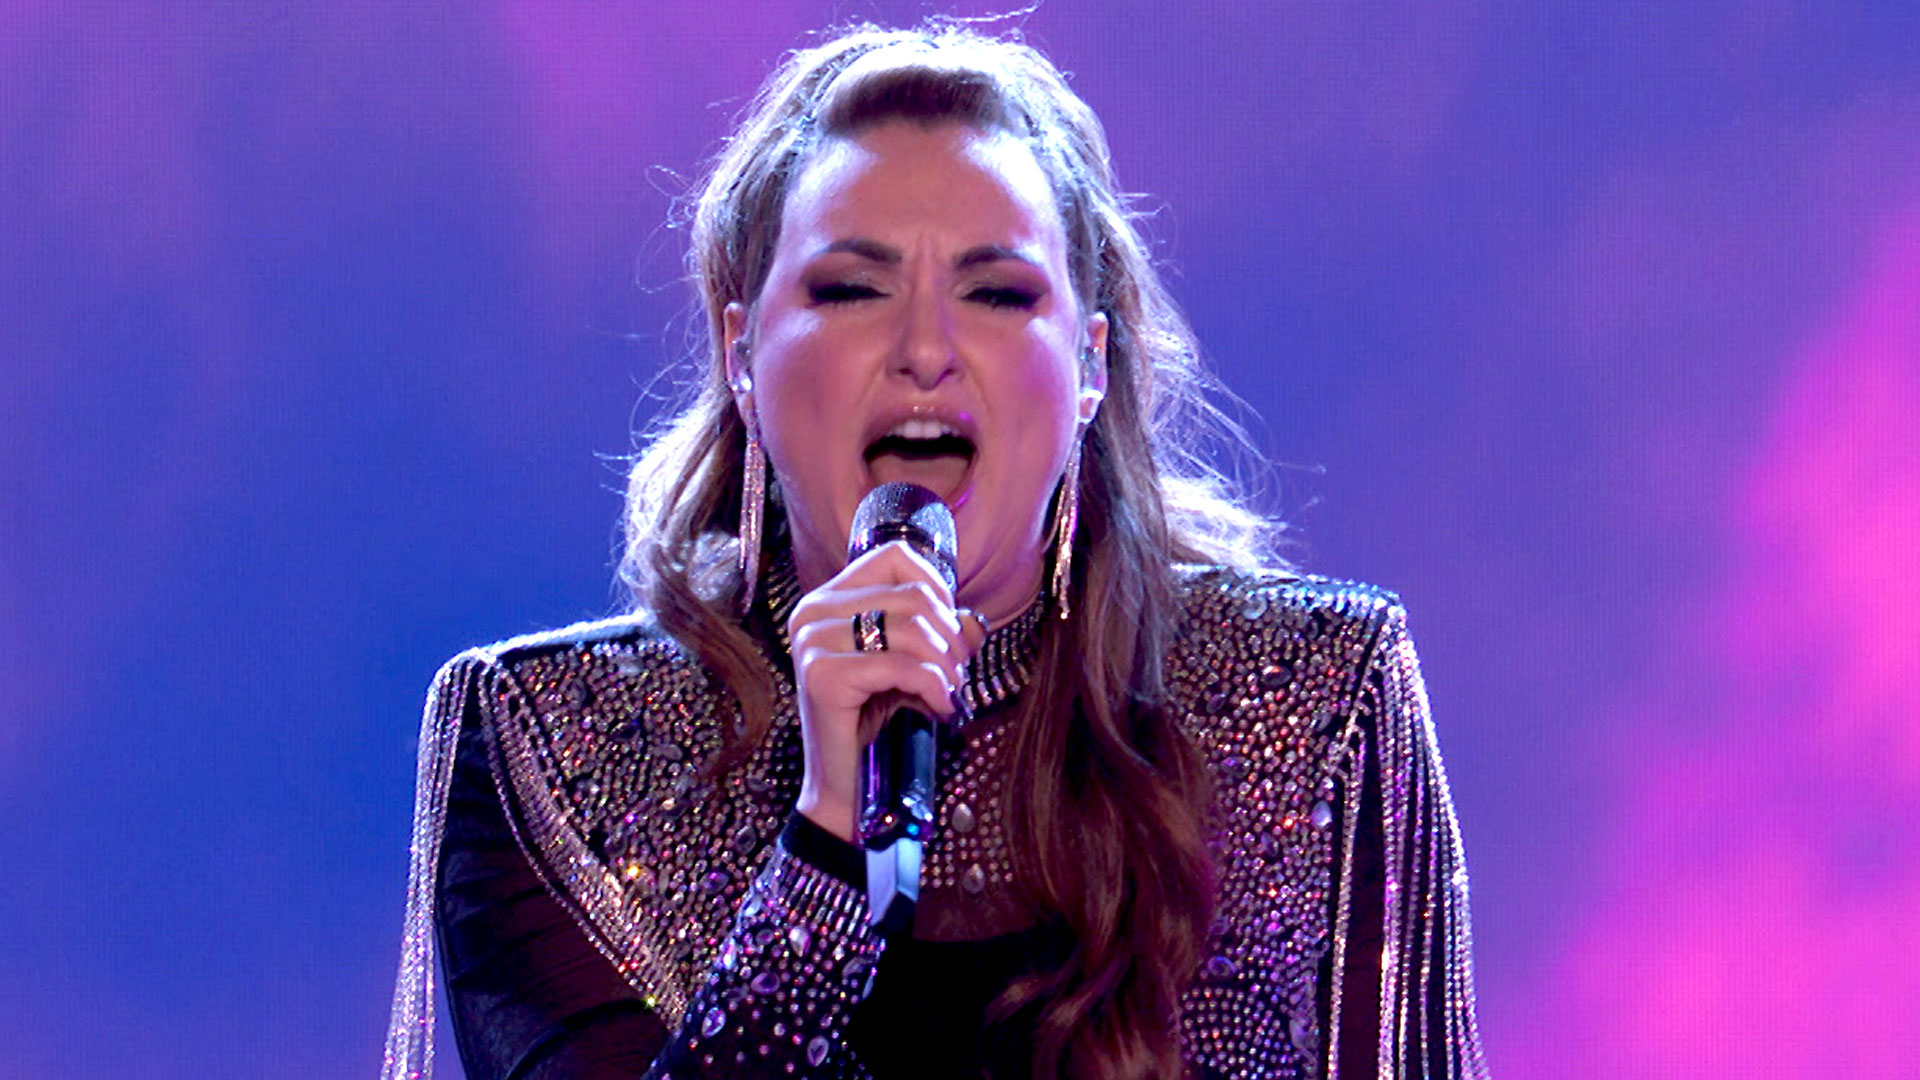 The best performances this week on The Voice, HIGHLIGHTS